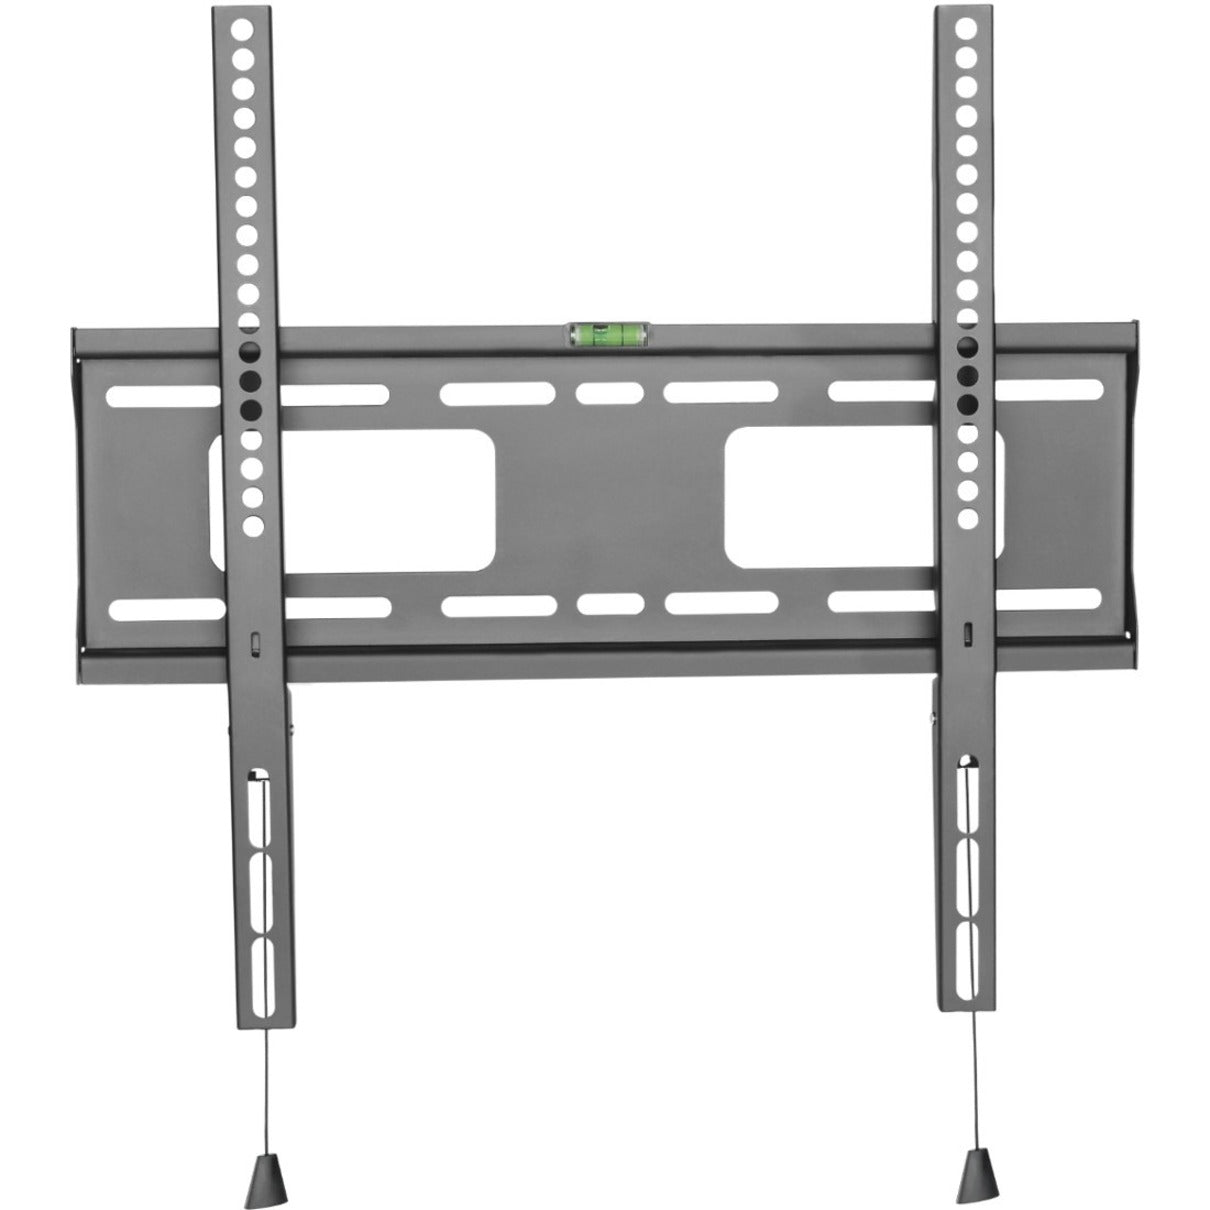 Atdec AD-WF-5040 Wall Mount for Digital Signage Display, Quick Release Mechanism, Cable Management, Spirit Level, Compact